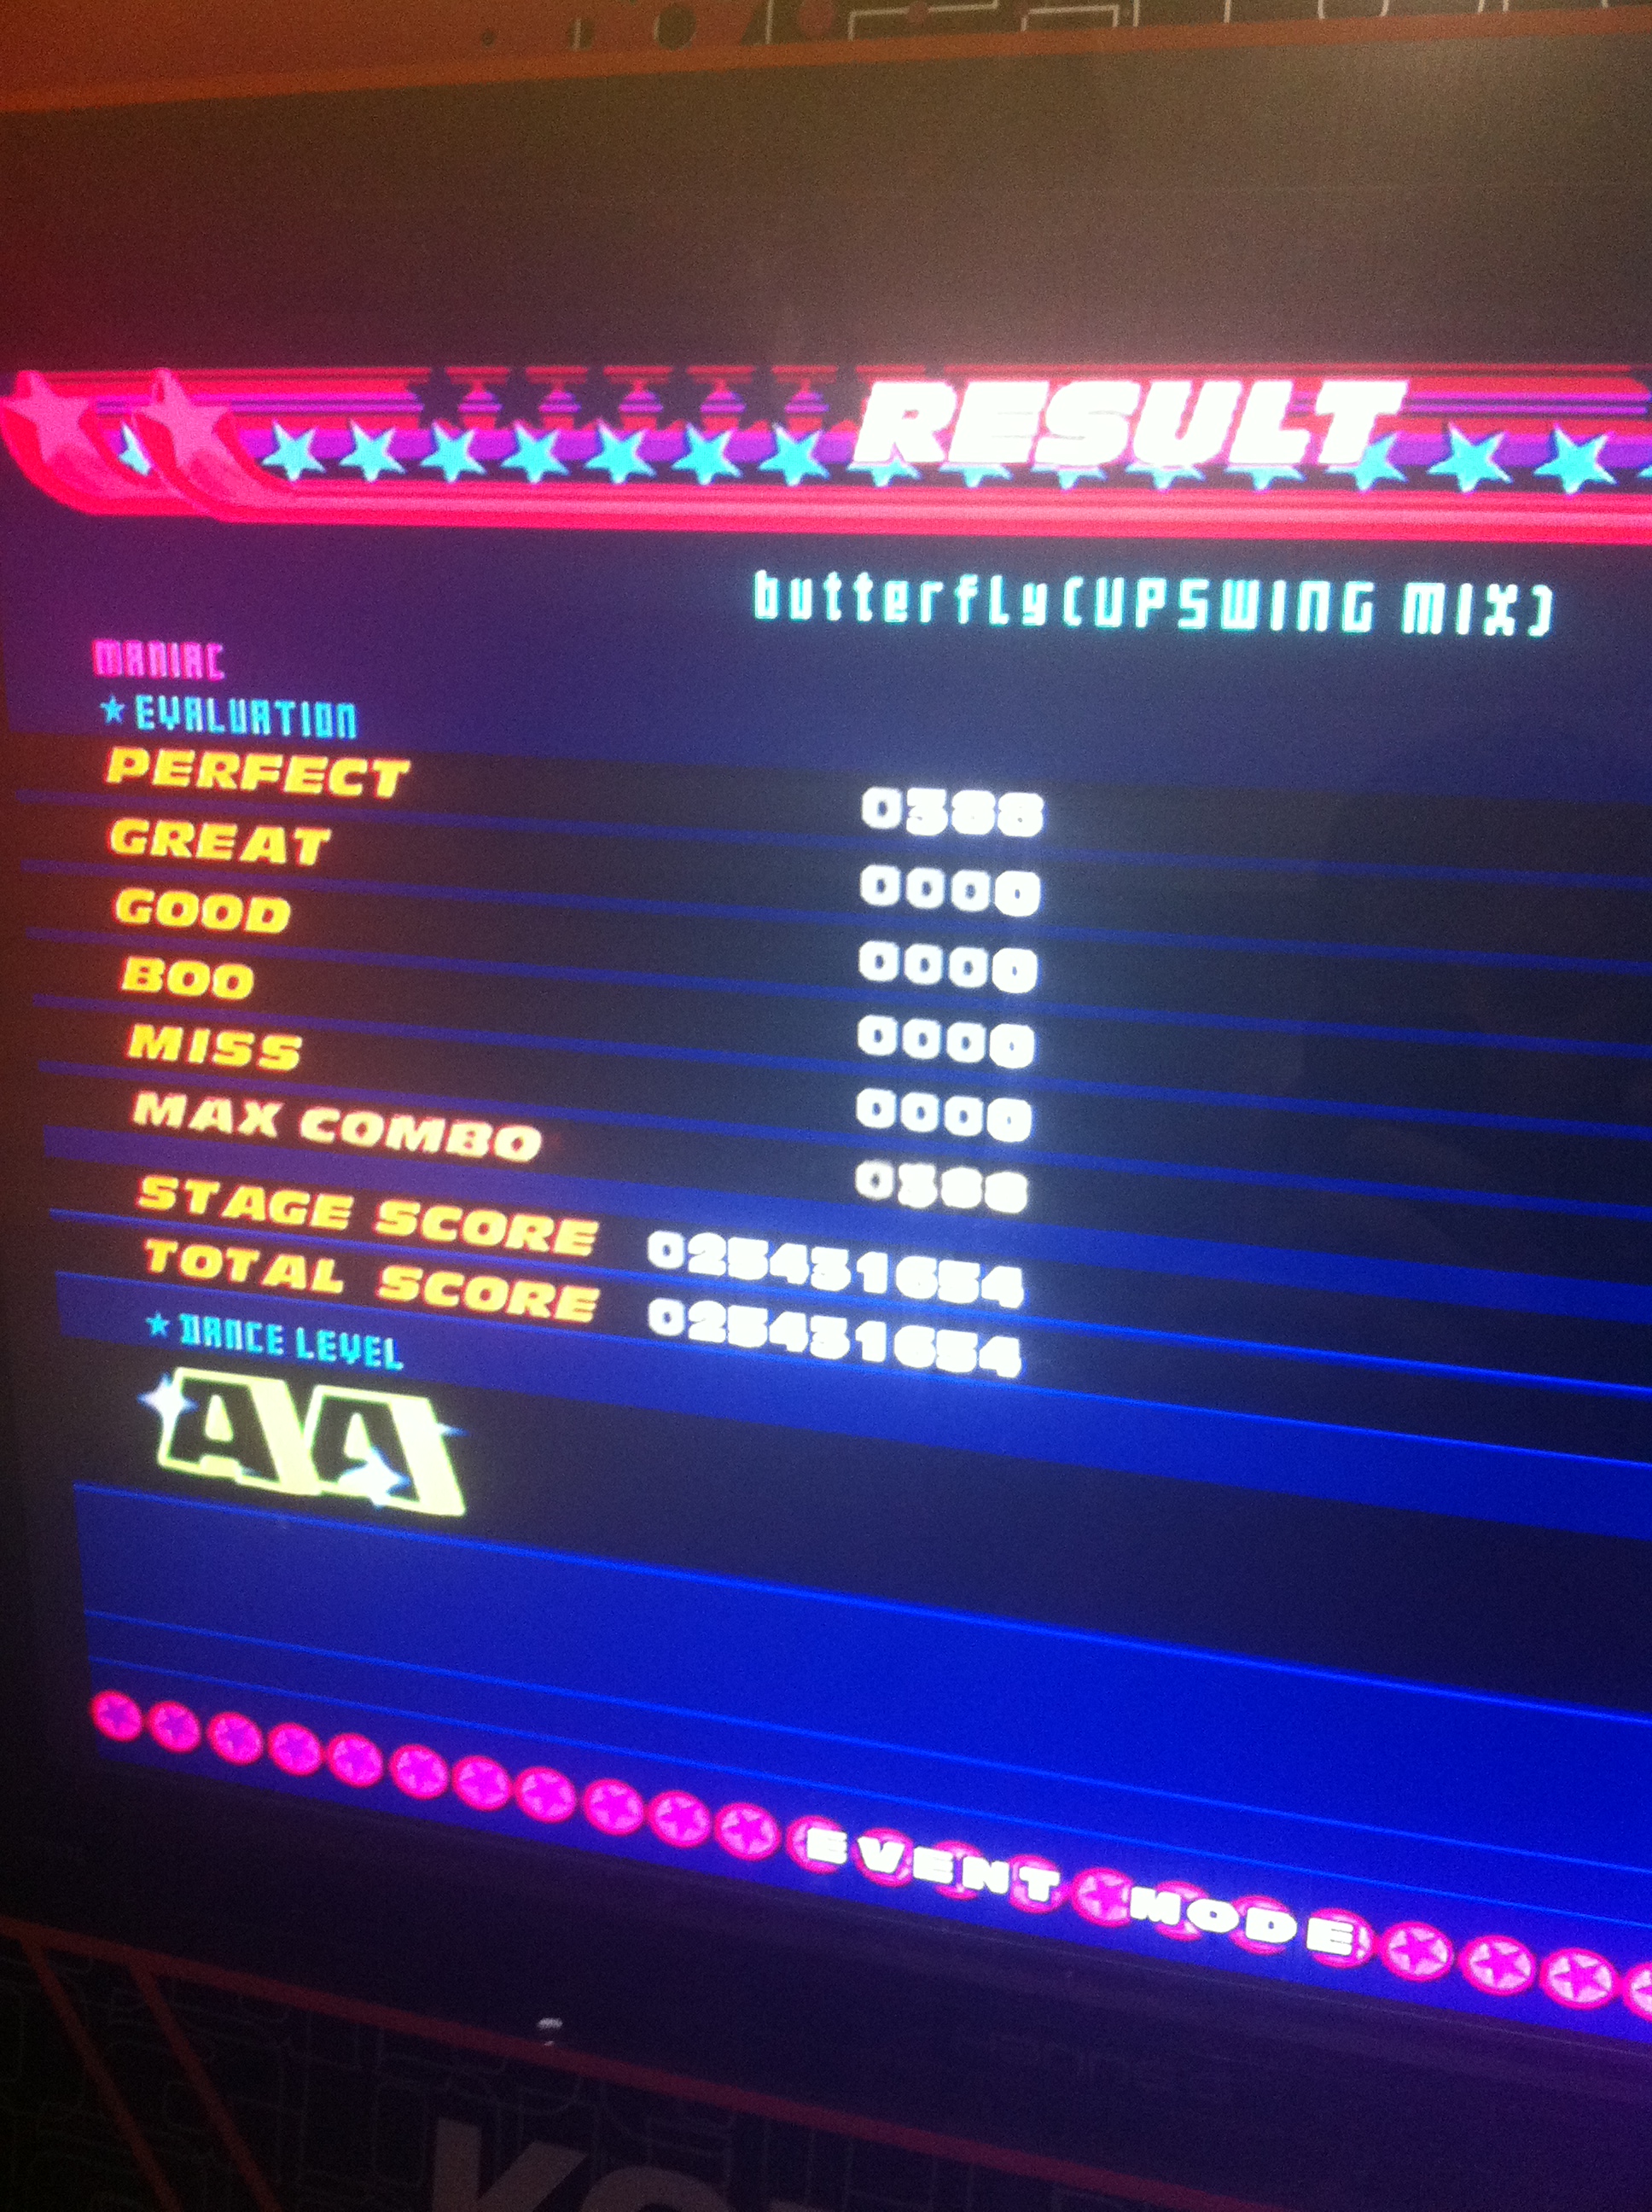 abstraktion sikring vores Kon - butterfly (UPSWING MIX) (Maniac) AAA on DDR 5th Mix (Japan) - Score  Tracker Evidence - DanceDanceRevolution - Games - Picture Gallery - ZIv